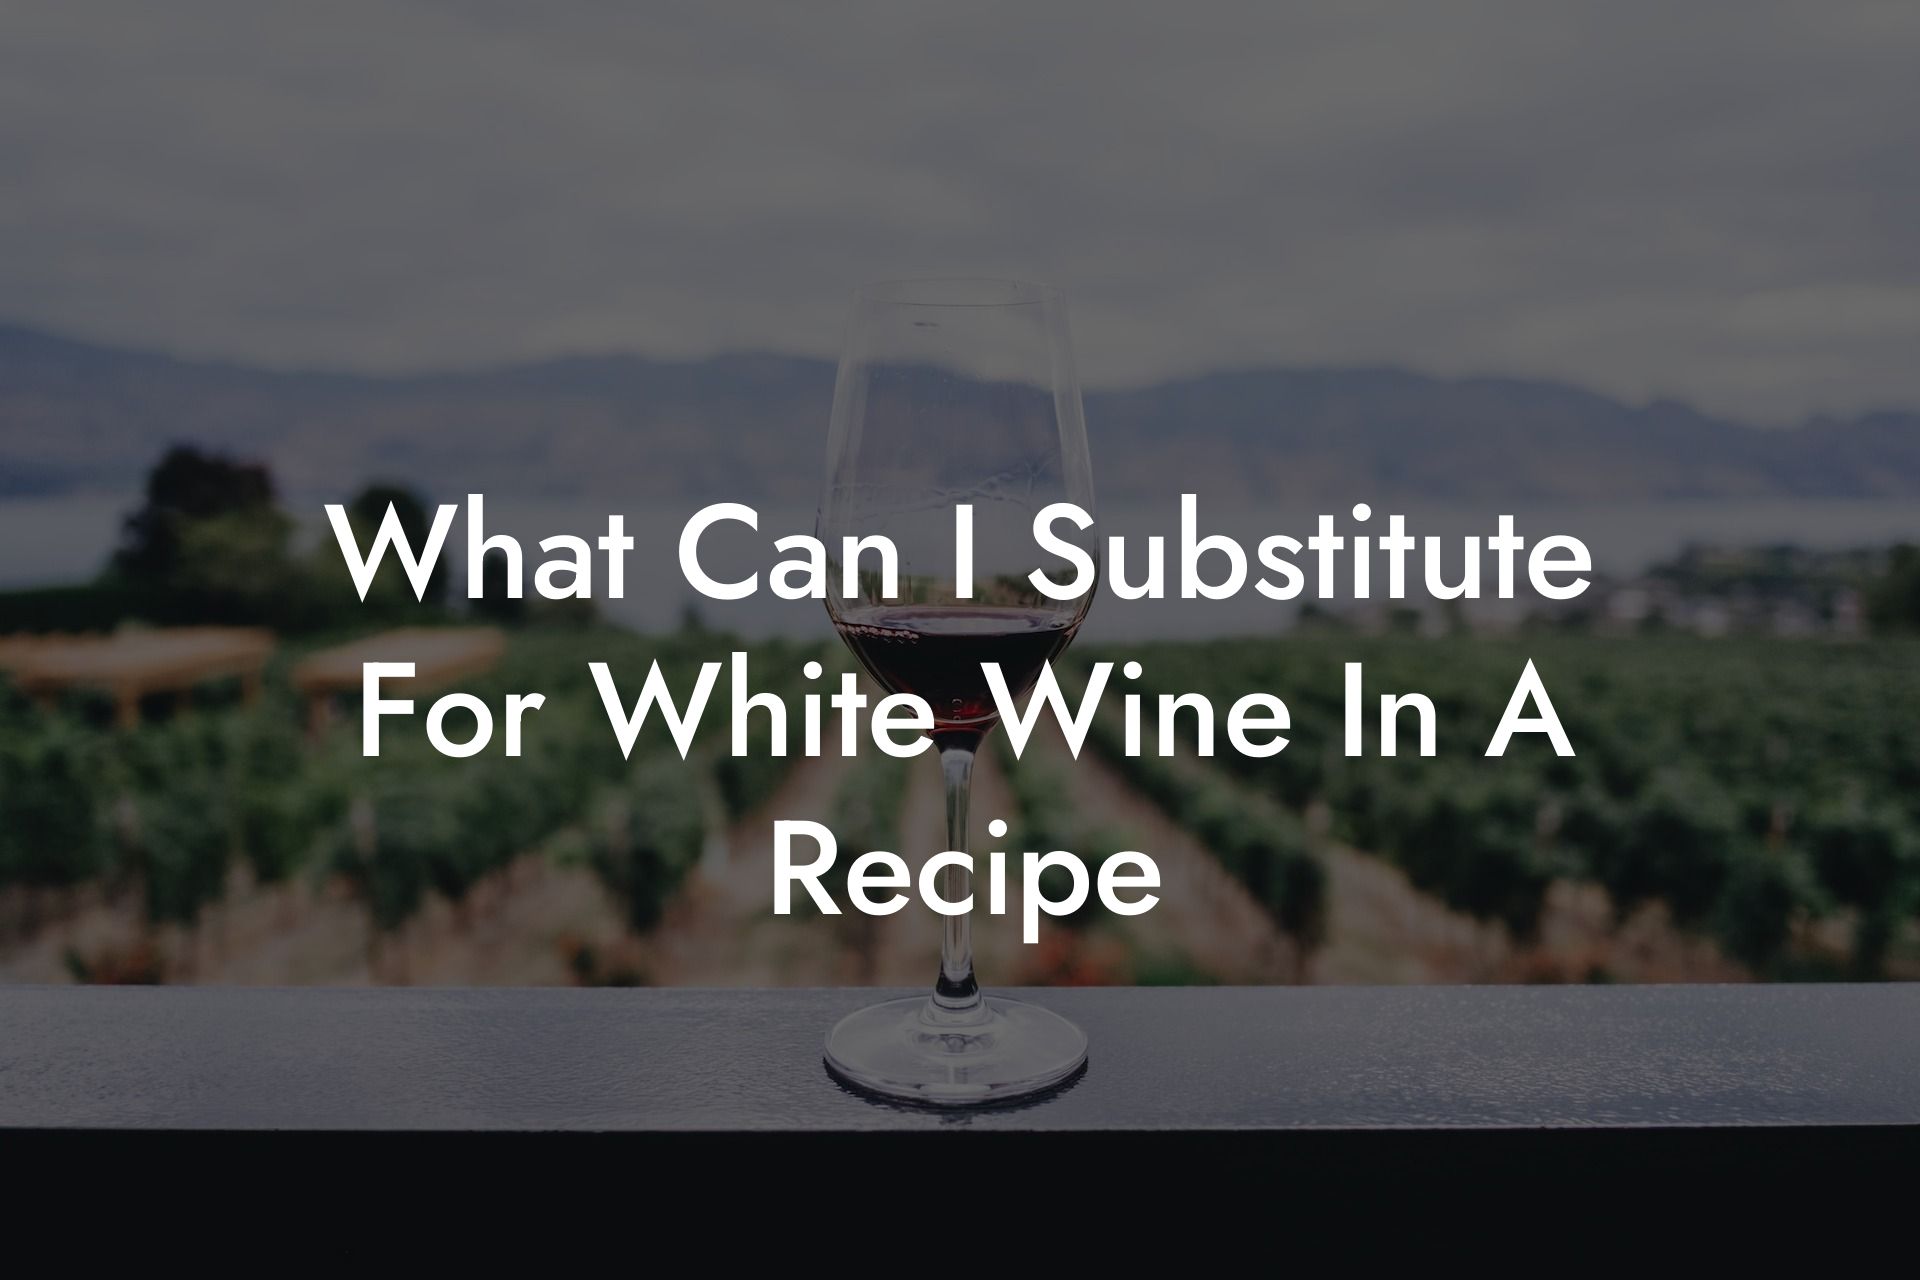 What Can I Substitute For White Wine In A Recipe